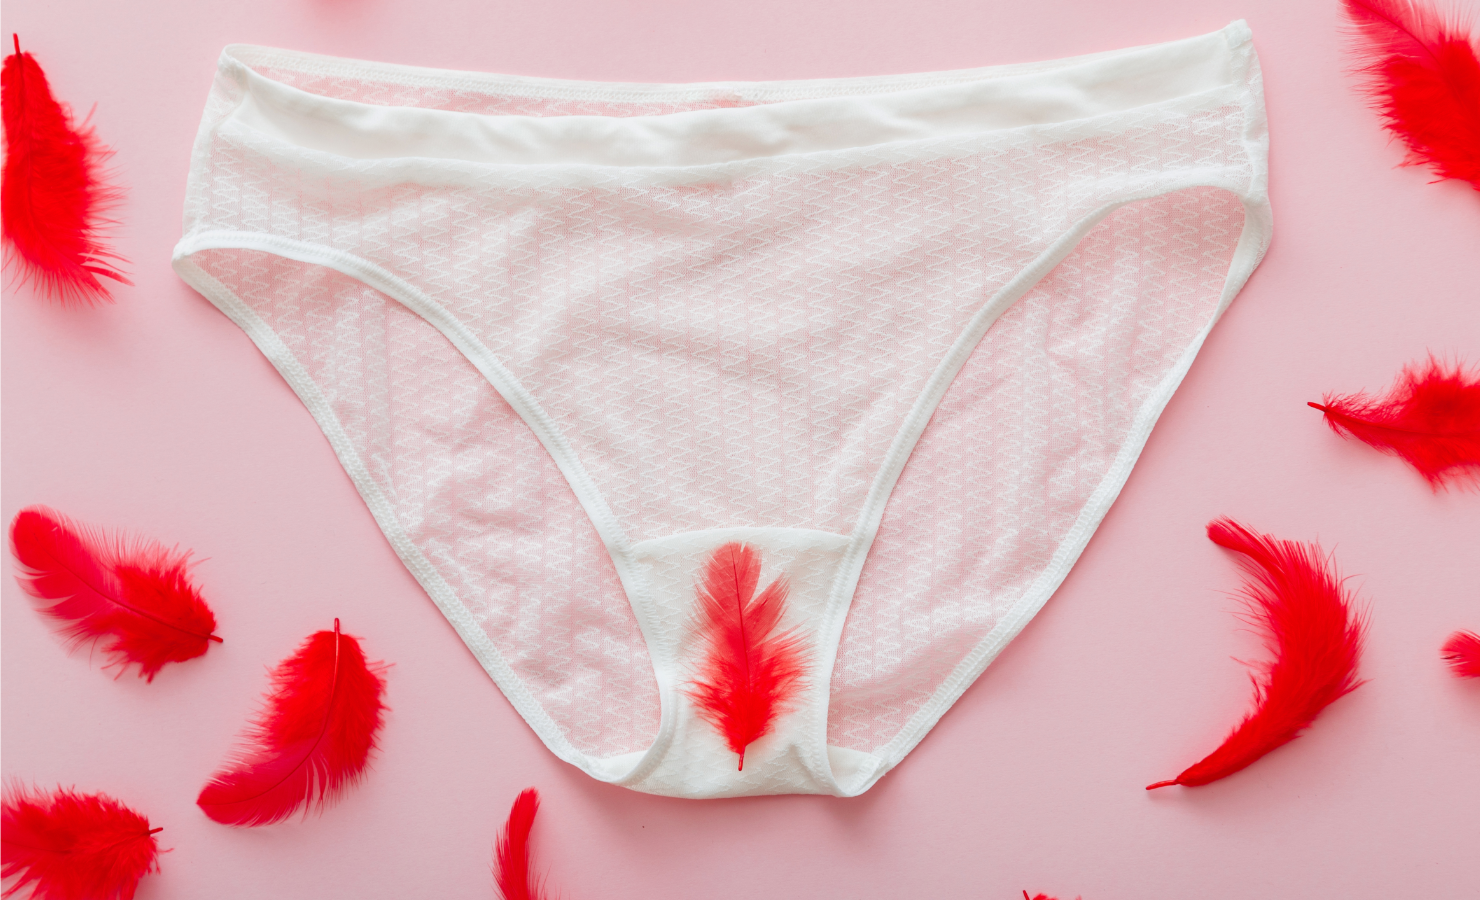 Spotting Before Periods: Causes & When to Seek Help